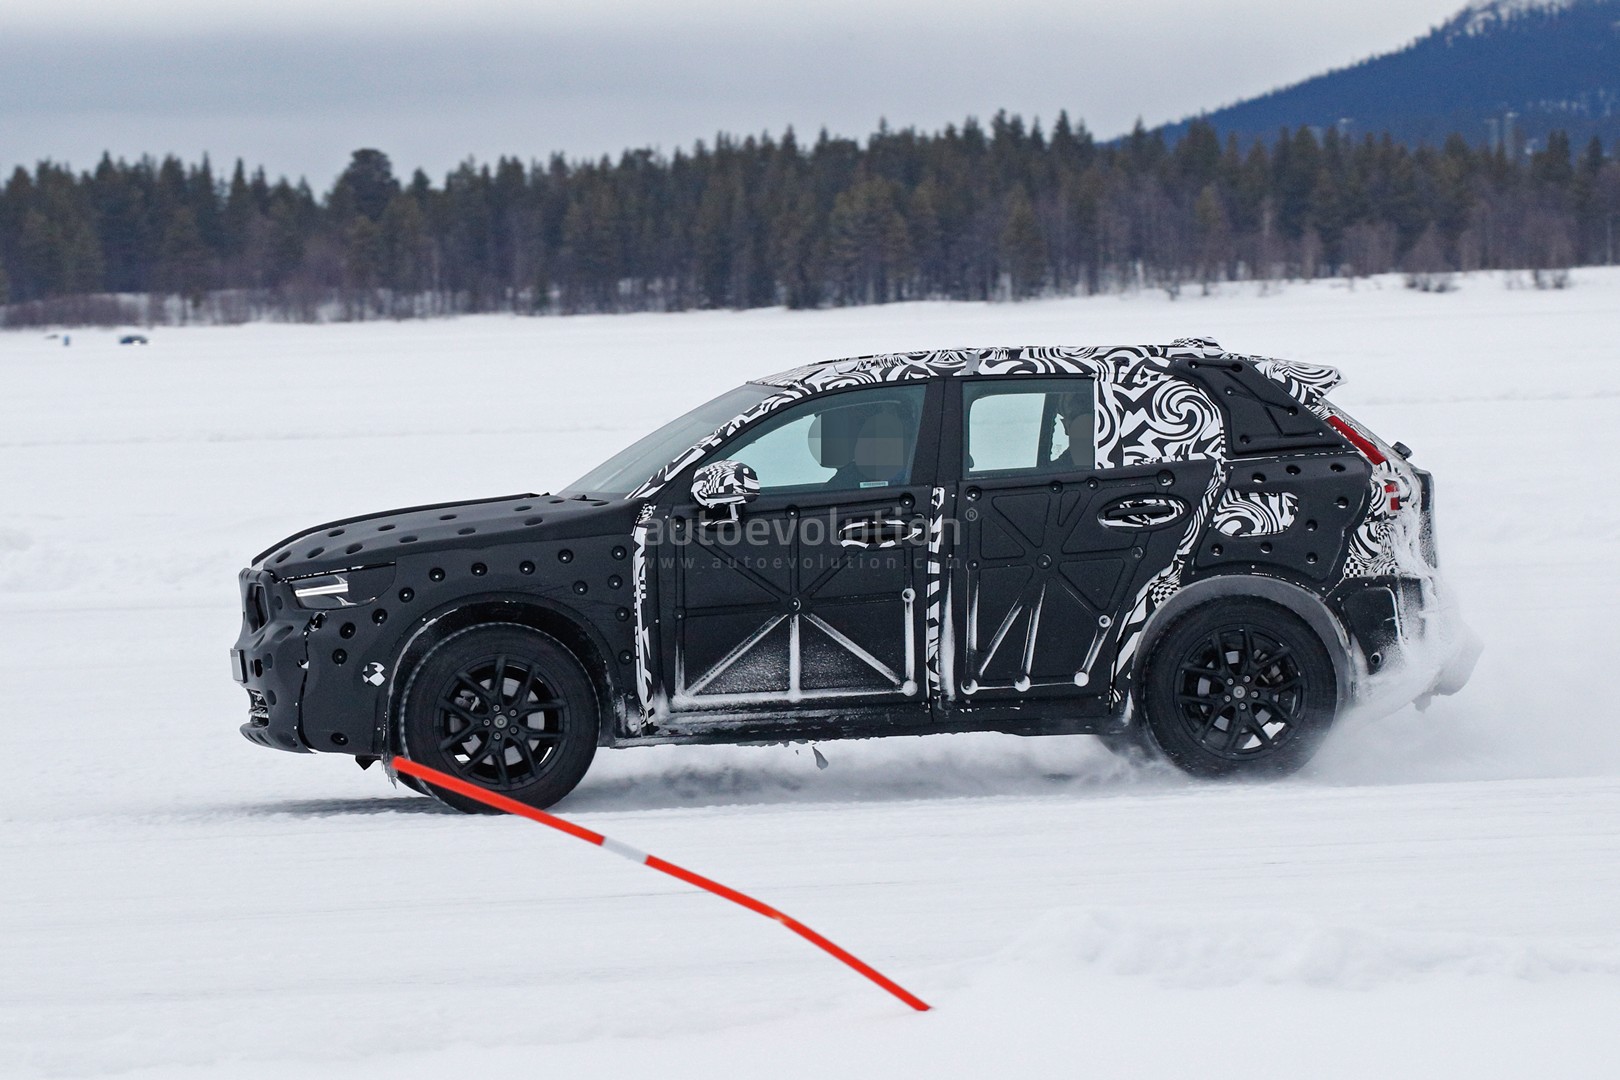 volvo-xc40-spied-undergoing-winter-testing-with-full-cabin_5